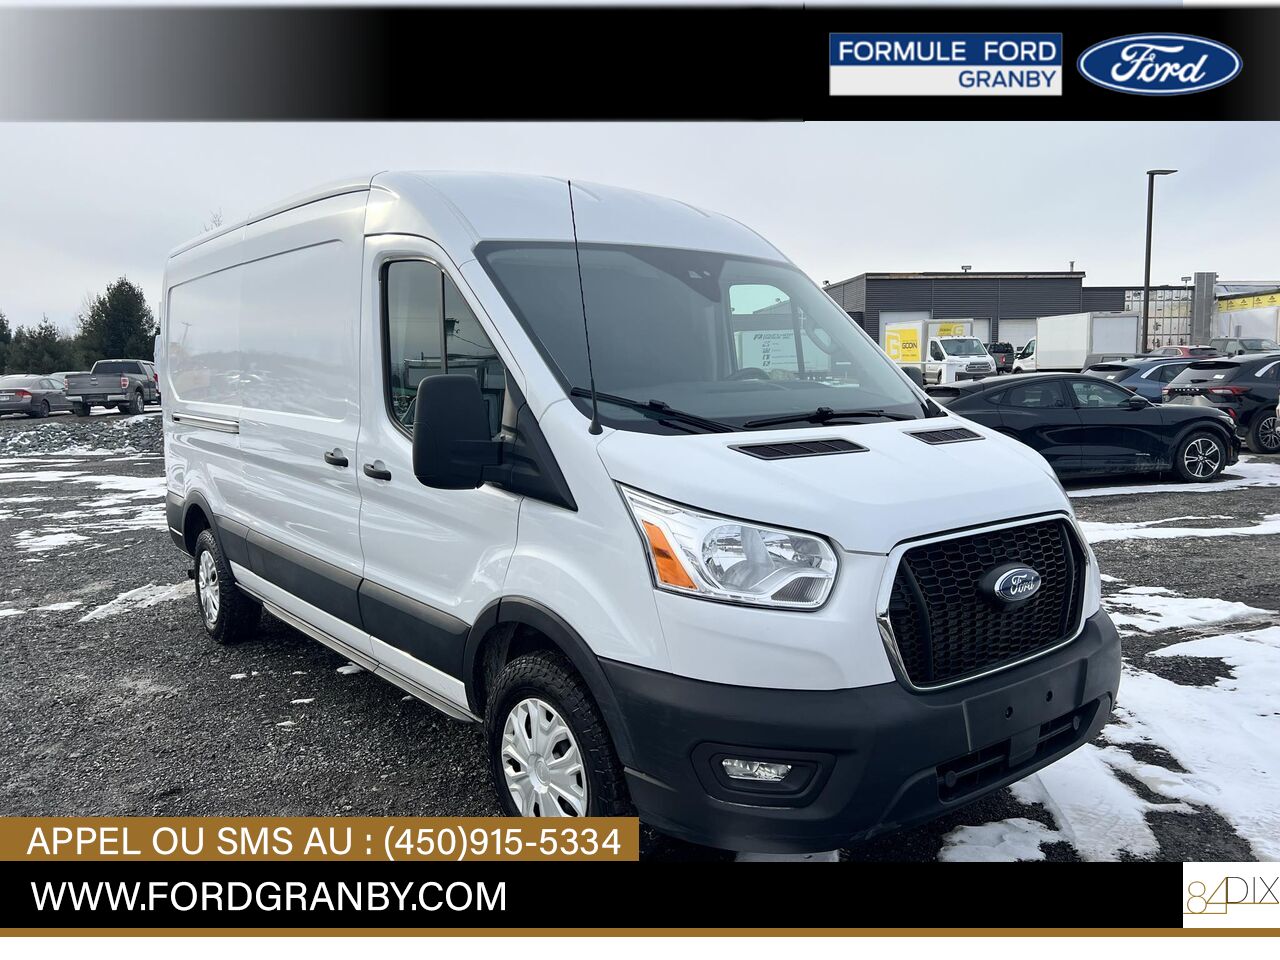 Ford Transit fourgon utilitaire 2021 Granby - photo #0